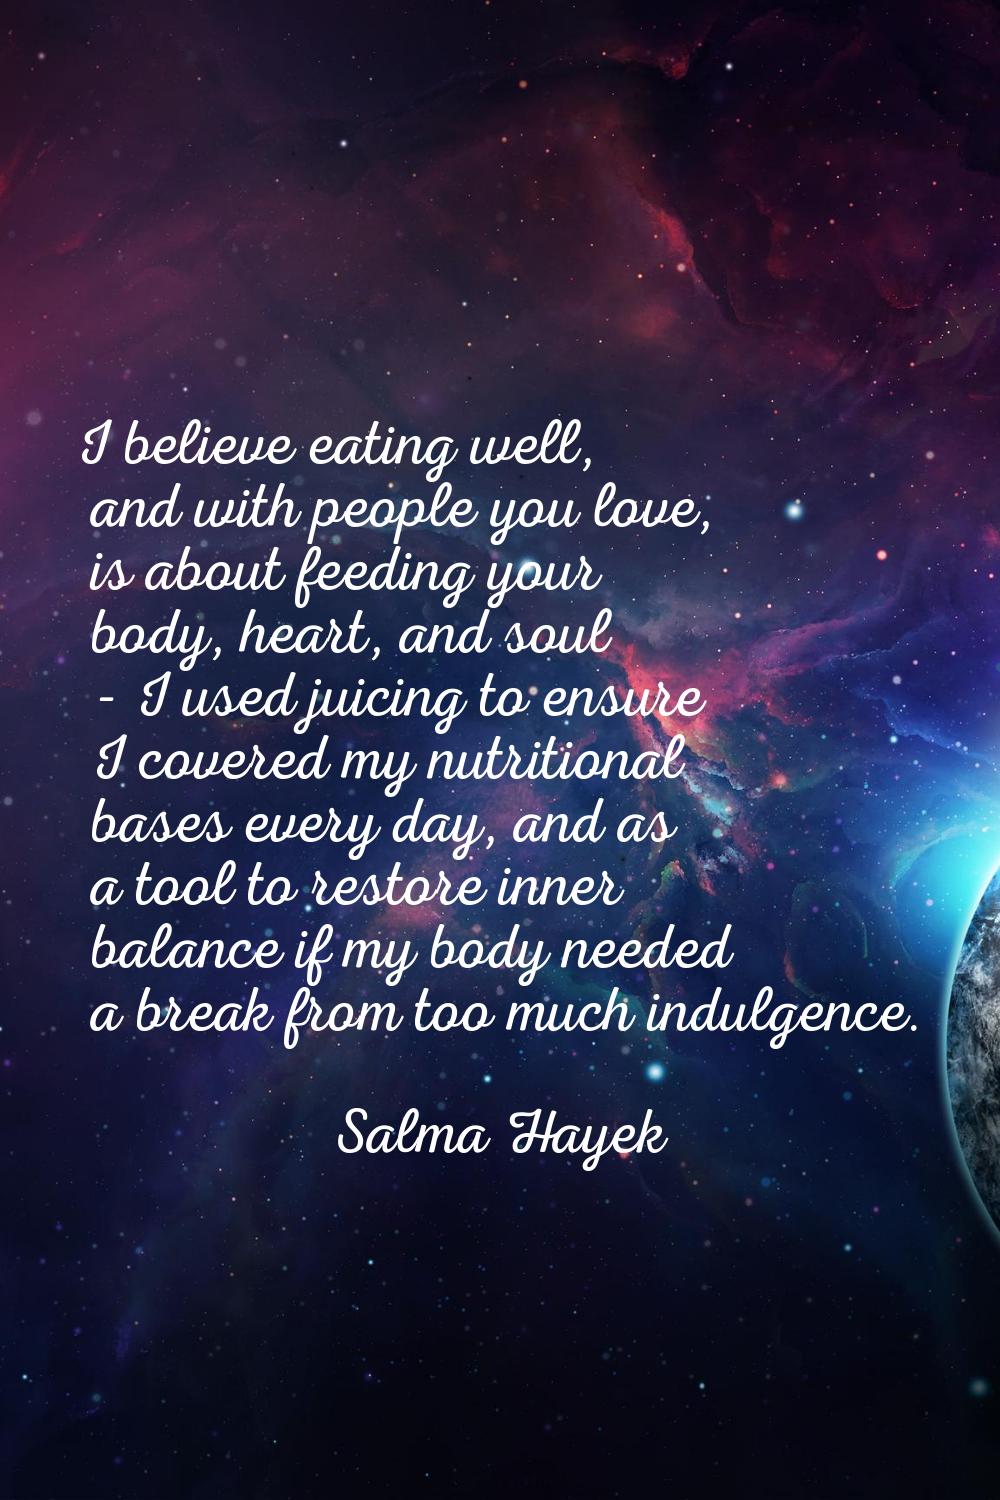 I believe eating well, and with people you love, is about feeding your body, heart, and soul - I us